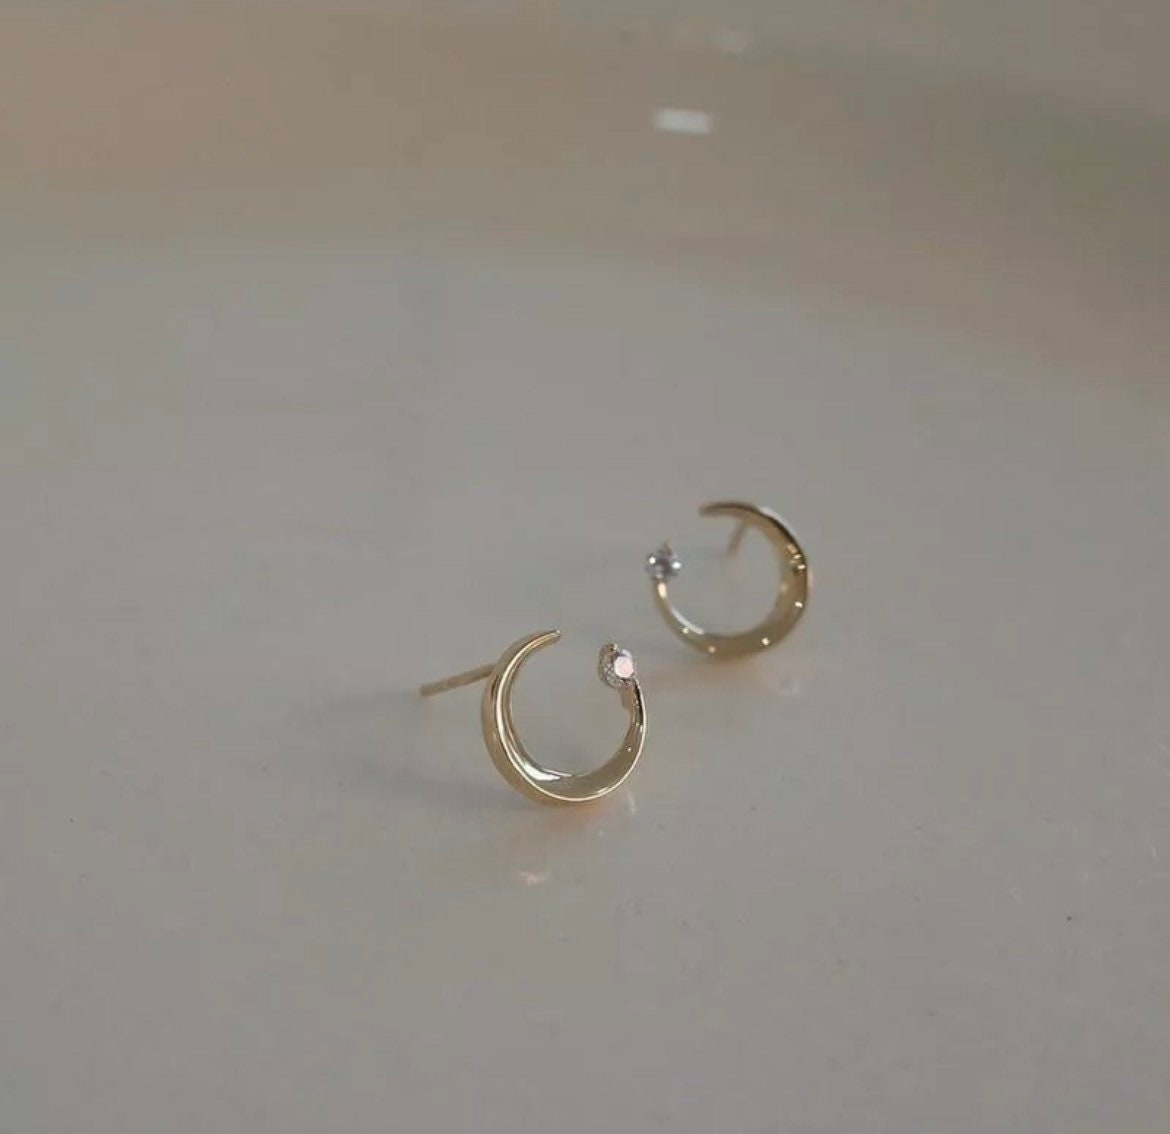 Minimalist Glossy Crescent Moon Crystal Stud Earrings For Women, Small Cute Little Earrings For Girls,Mothers Day Perfect Gift,Jewellery